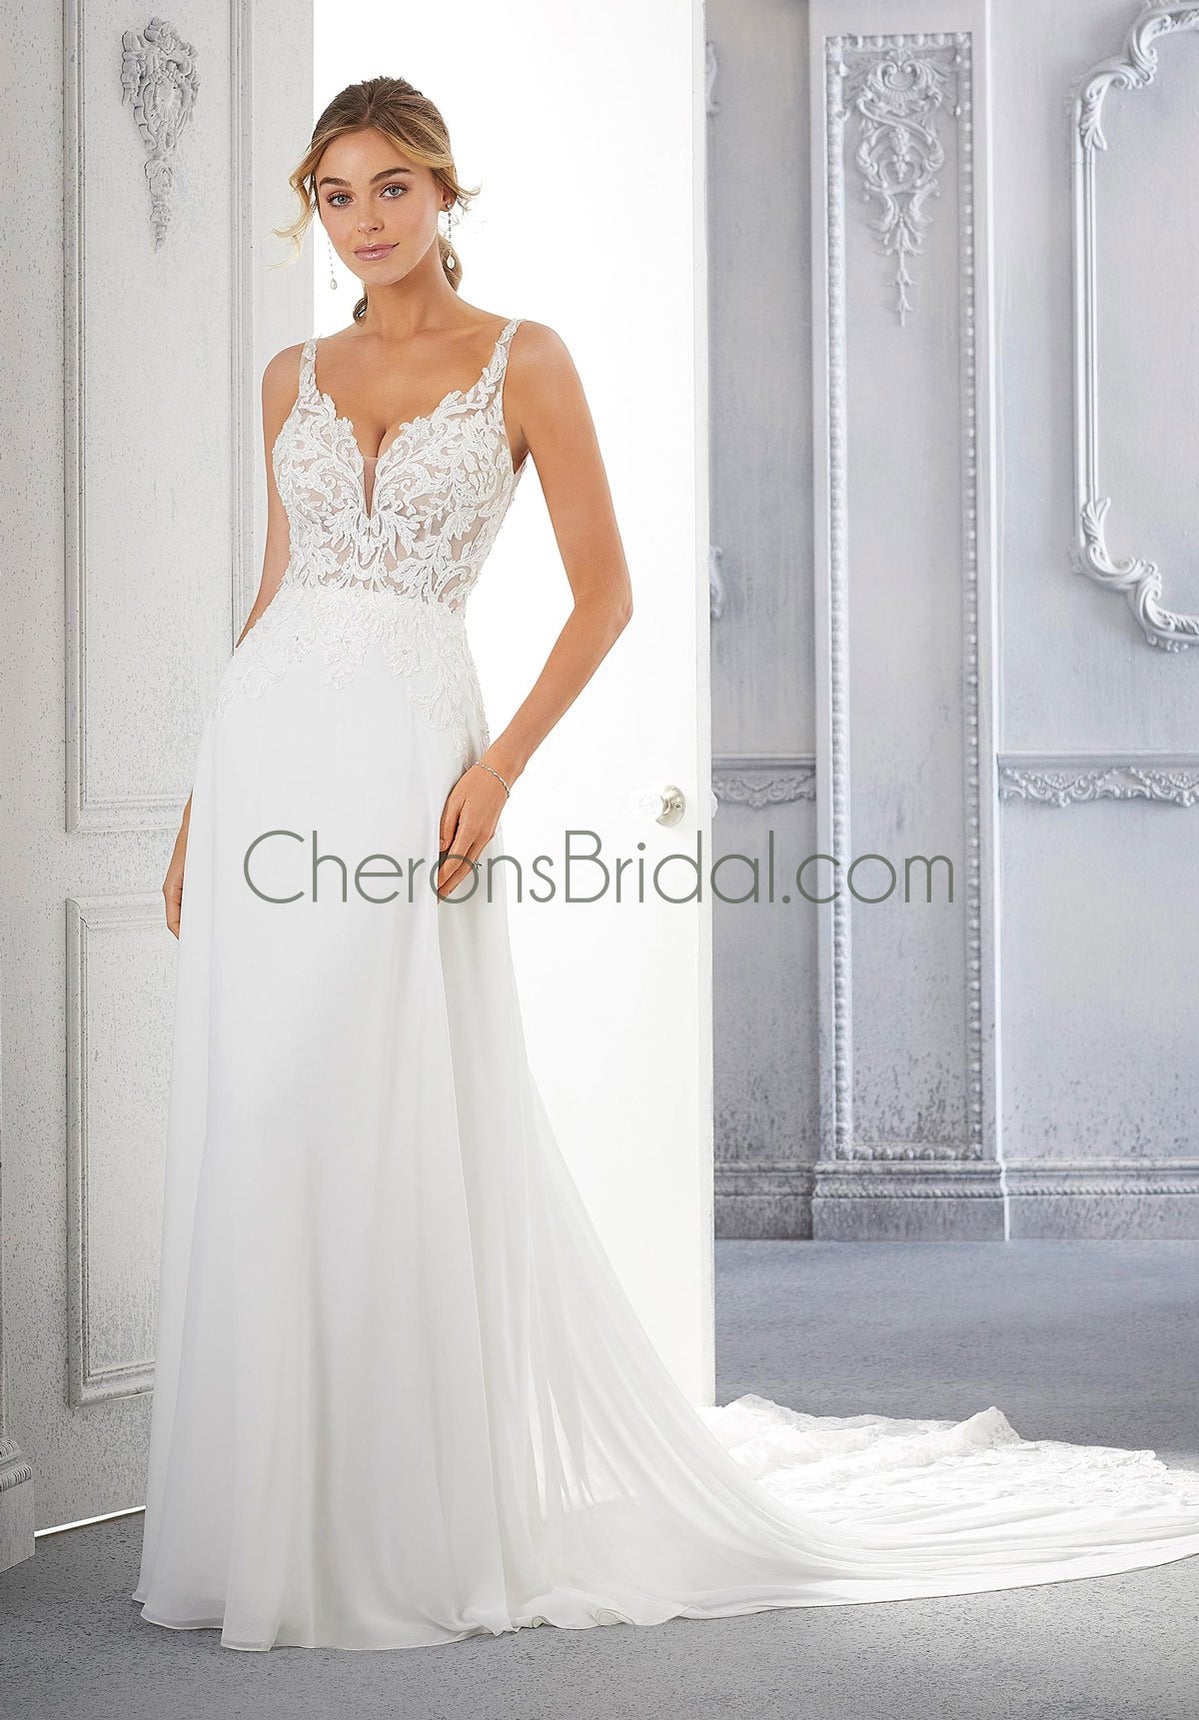 Morilee - 2367 - Caroline - Cheron's Bridal, Wedding Gown - Morilee Line - - Wedding Gowns Dresses Chattanooga Hixson Shops Boutiques Tennessee TN Georgia GA MSRP Lowest Prices Sale Discount